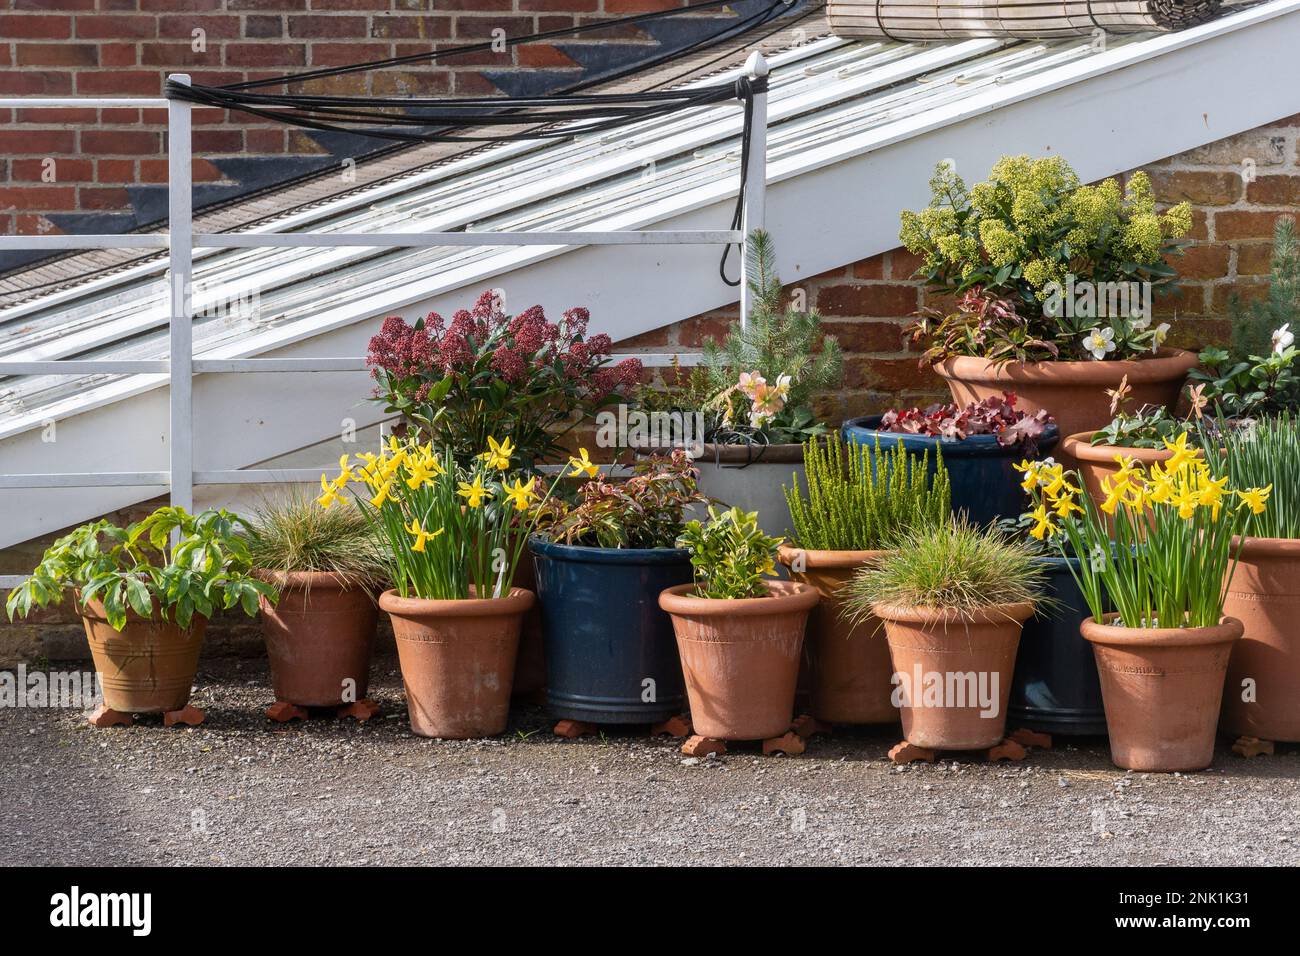 Display of early spring bulbs and flowers including flowering dwarf daffodils in terracotta pots, England, UK Stock Photo